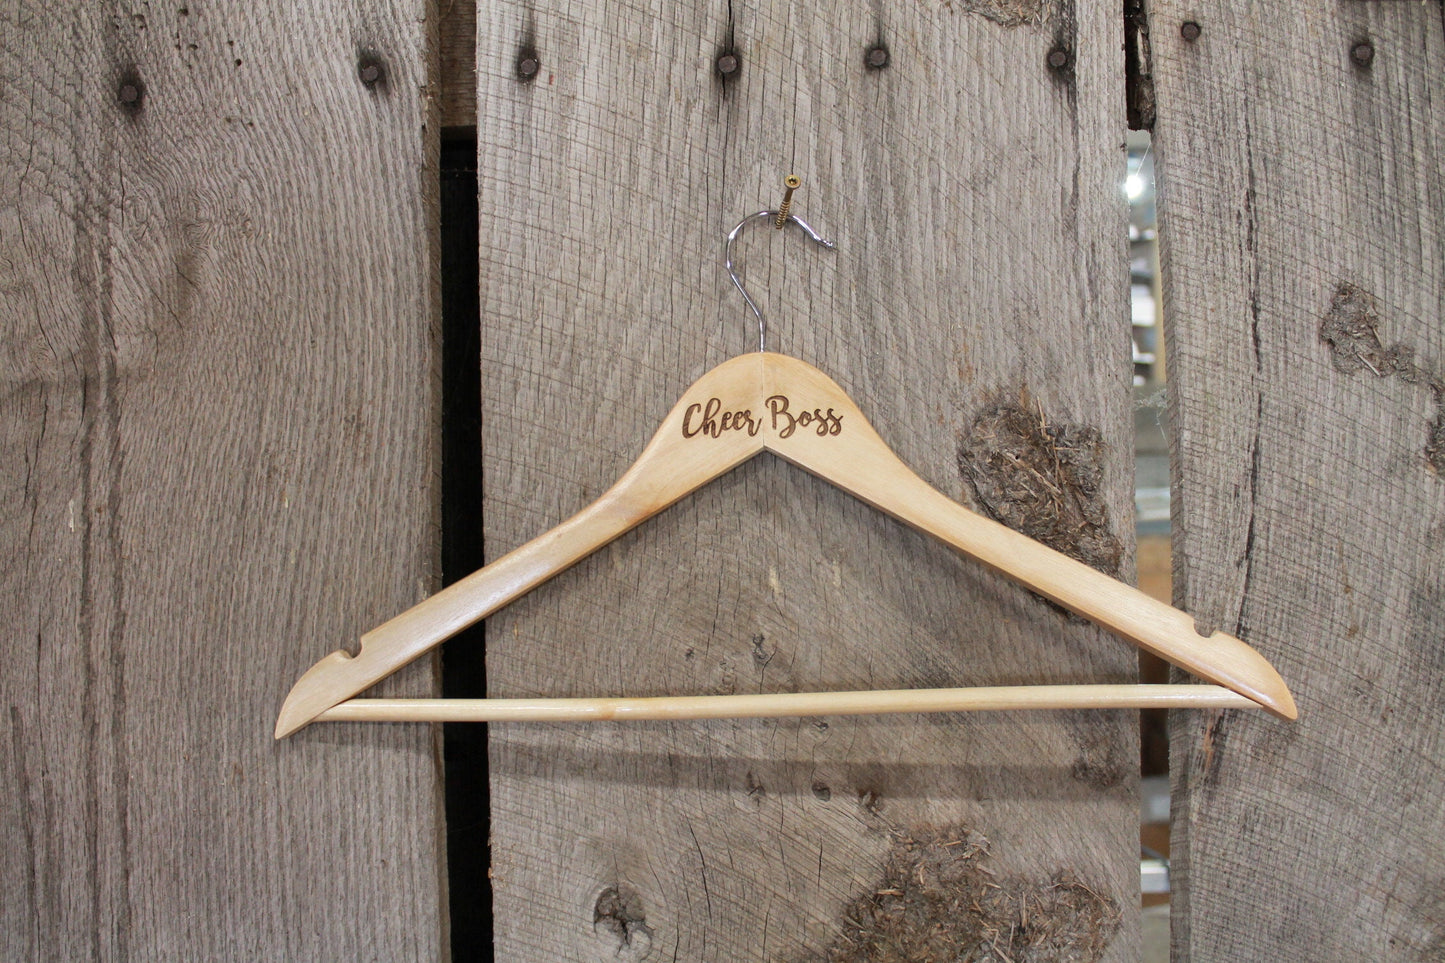 Cheer Boss Cheer Leading Cheer Leader Costume Uniform Clothes Hanger Engraved Hard Wood Sturdy